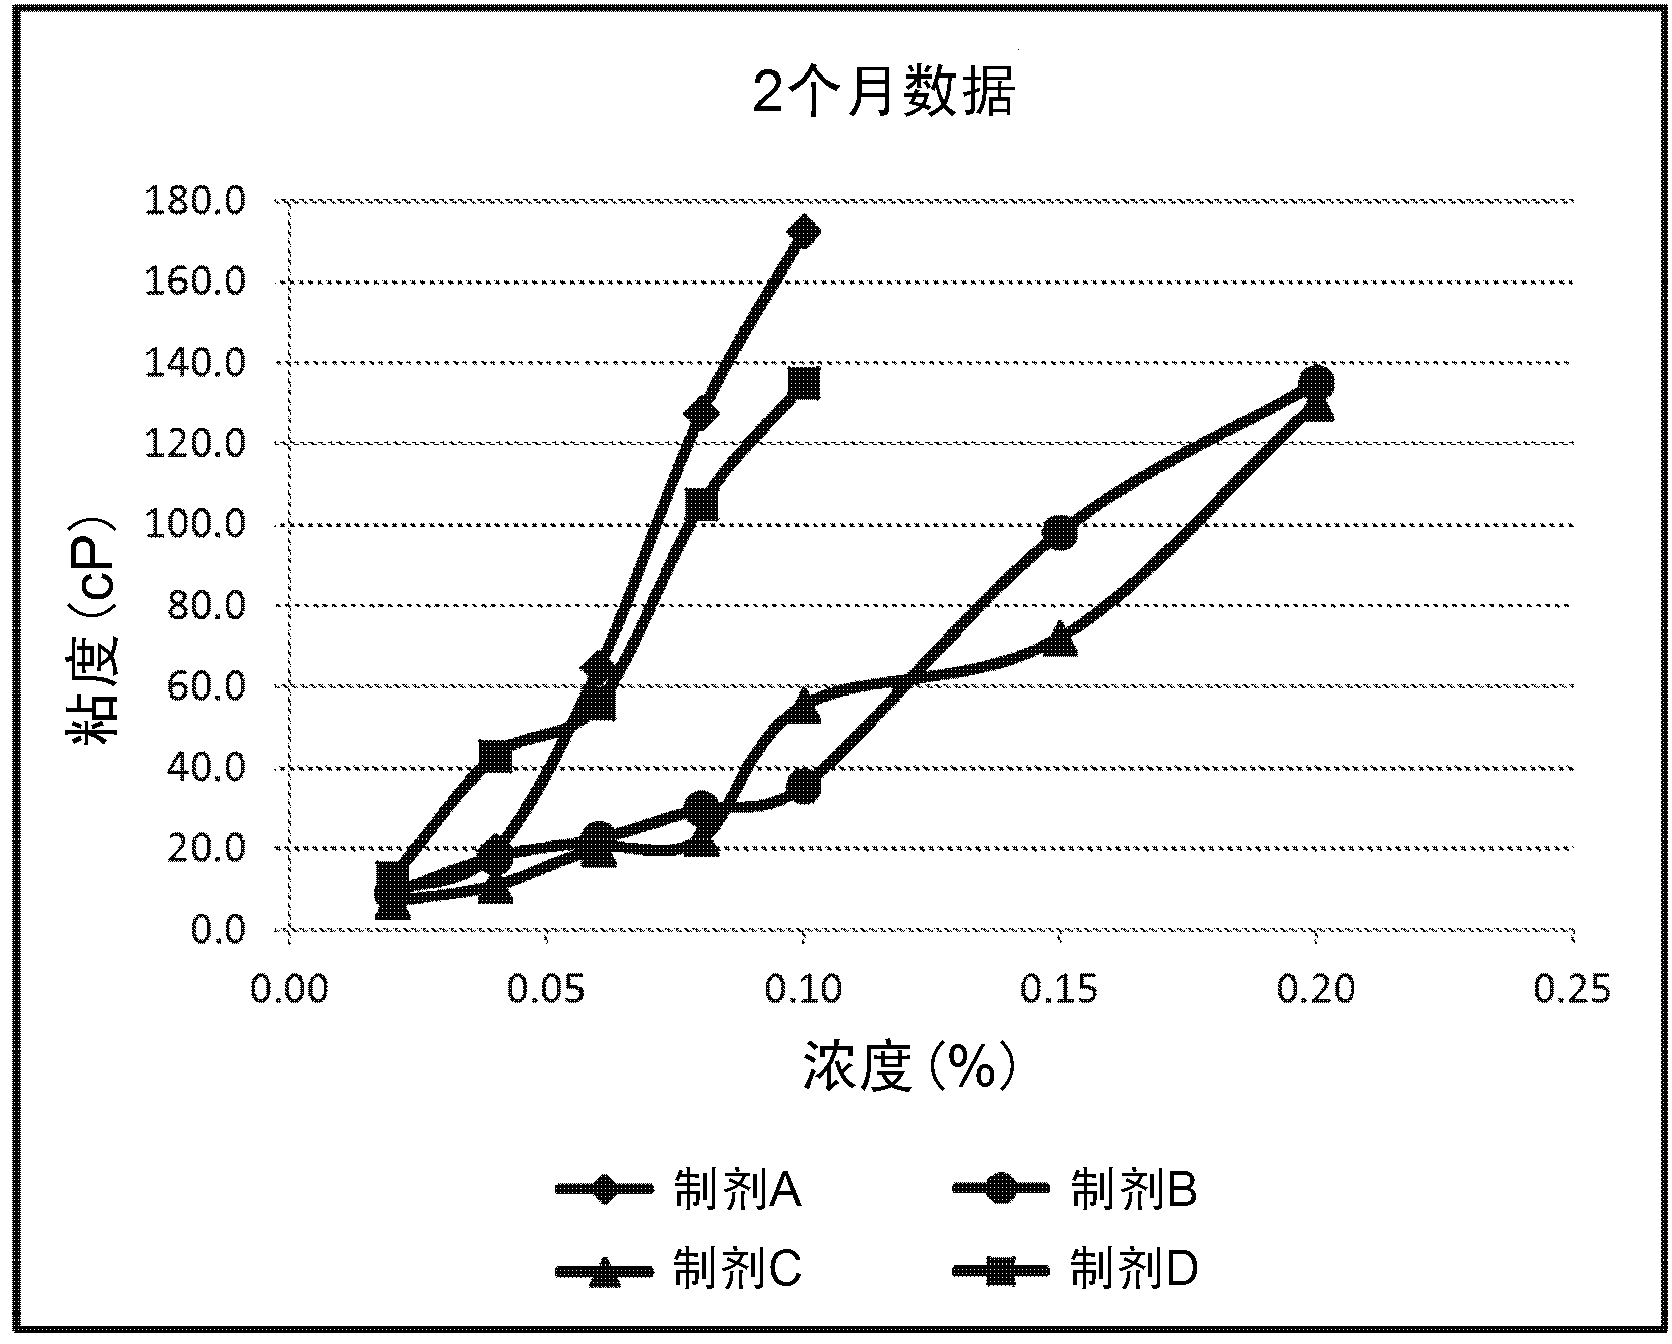 Liquid formulation containing protein and lambda carrageenan from halymeniales